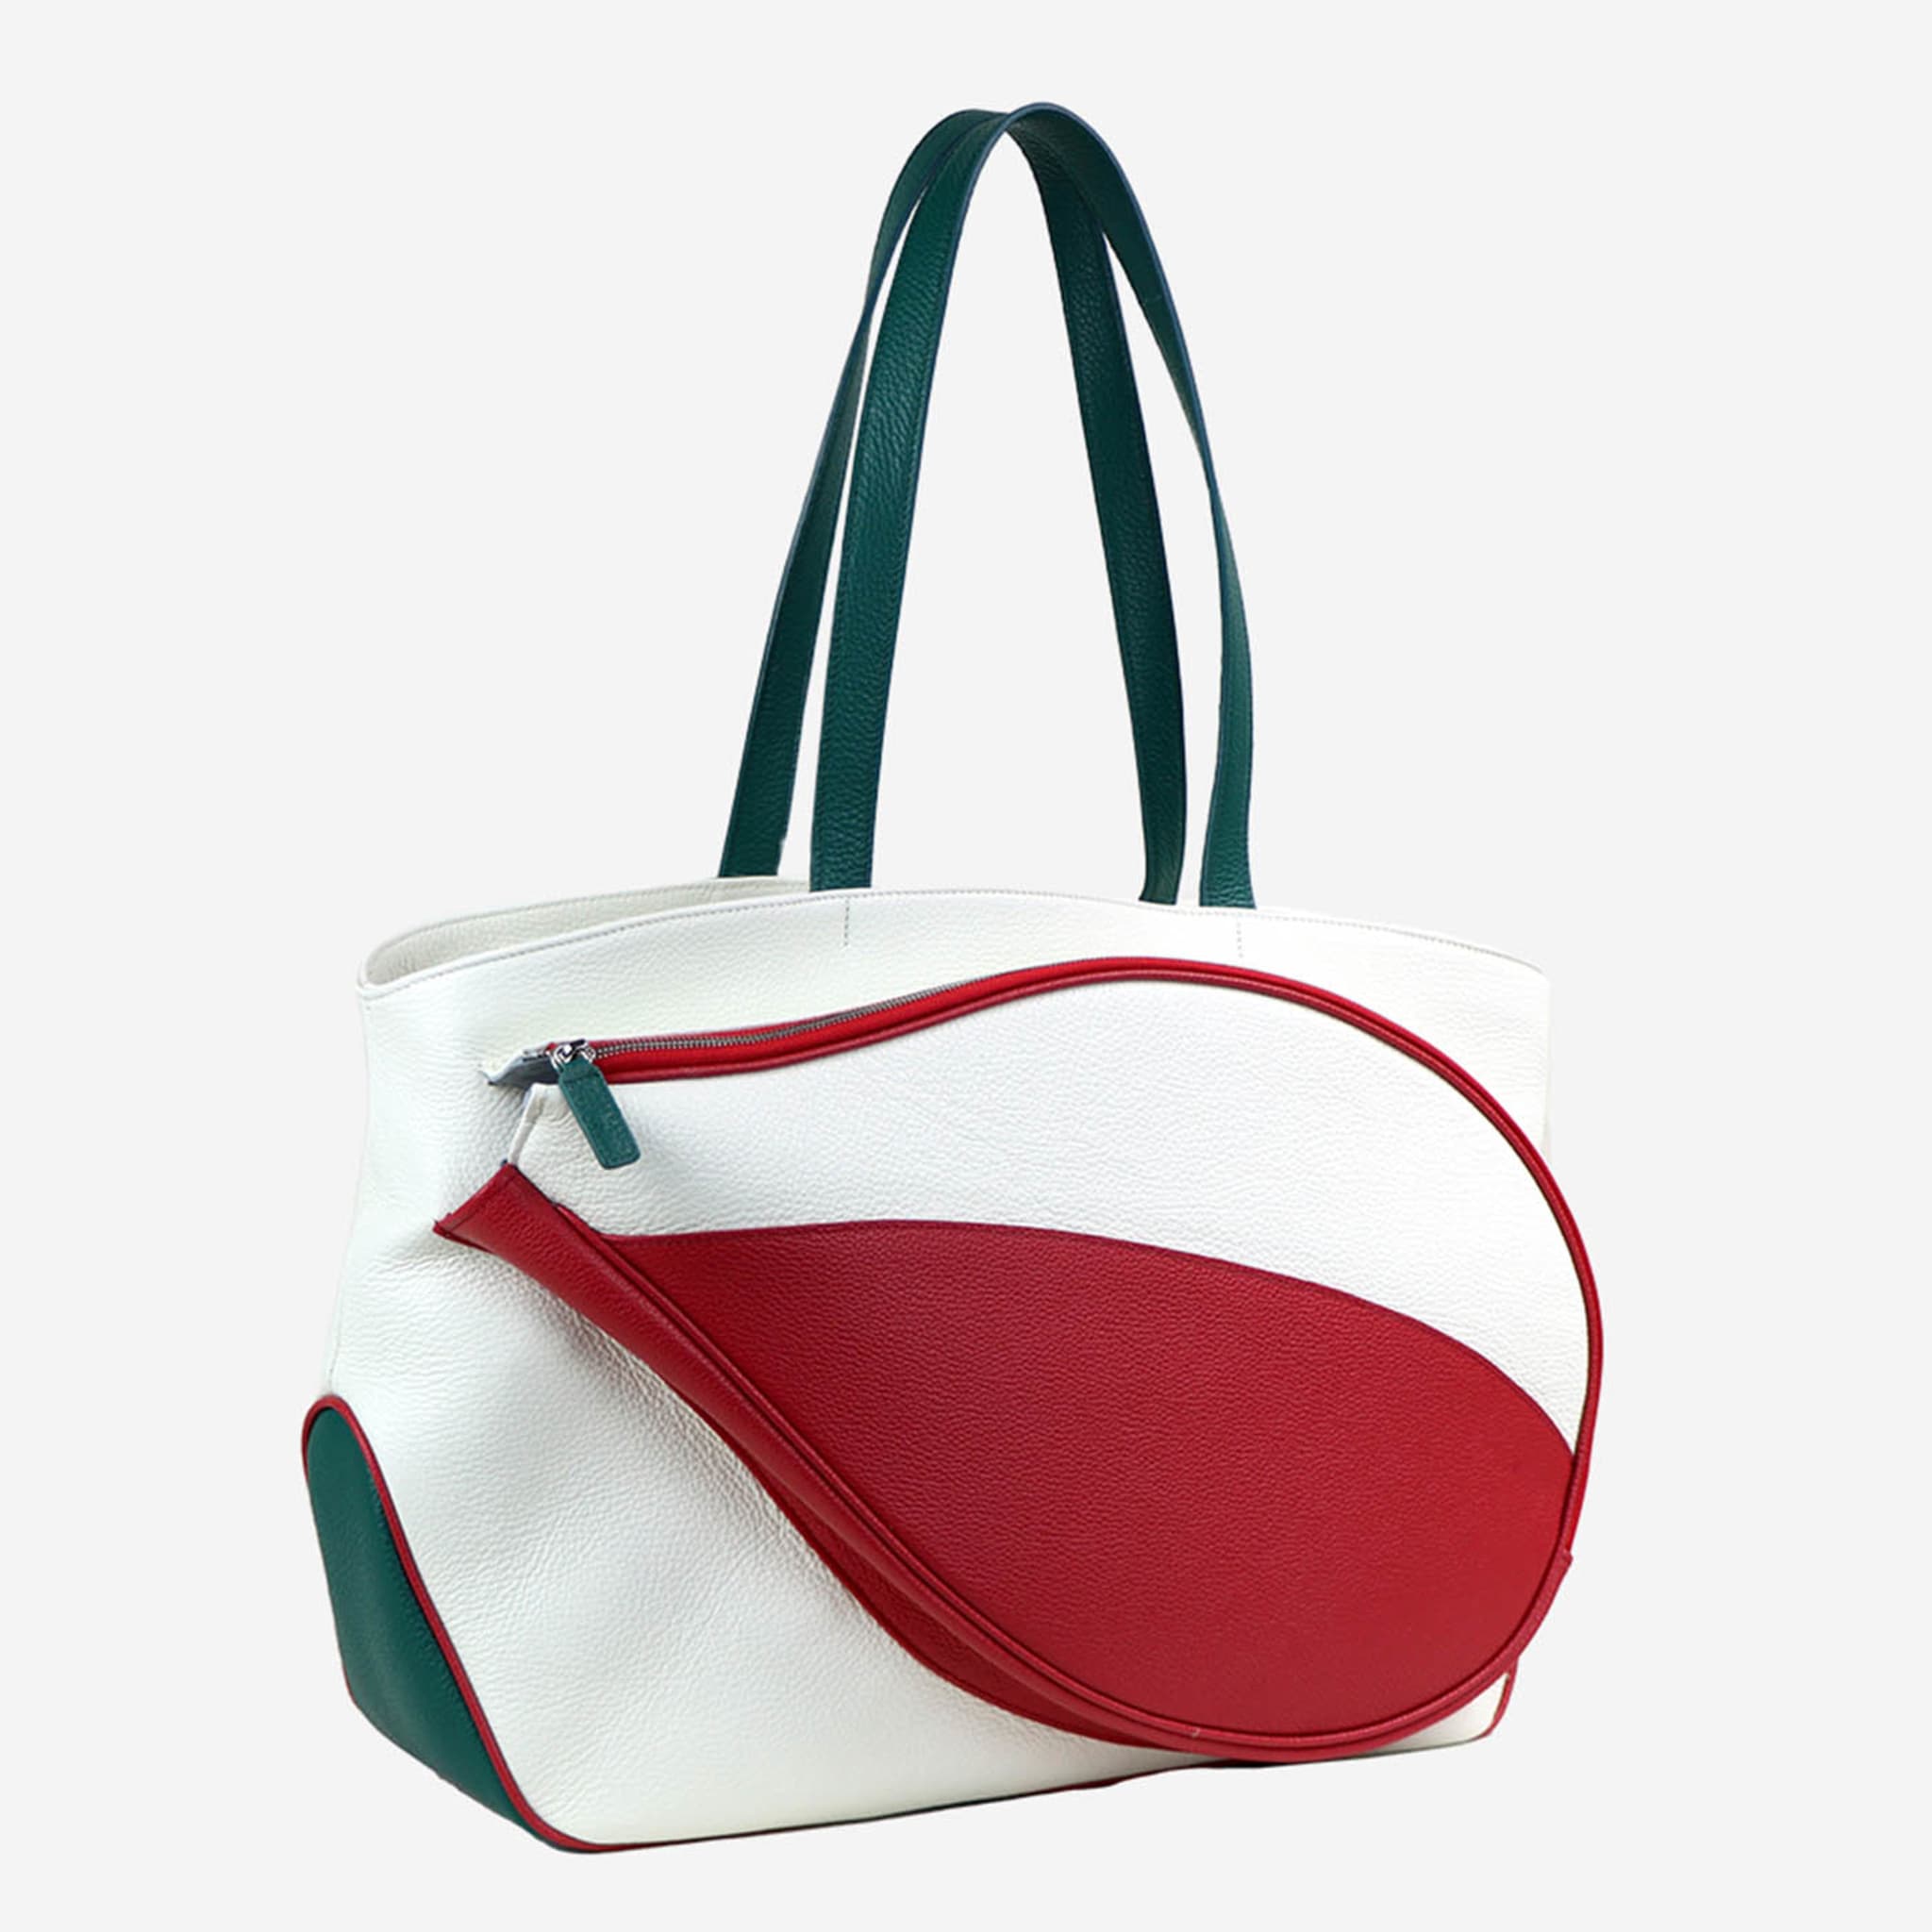 Sport White & Red Bag with Tennis-Racket-Shaped Pocket - Alternative view 3